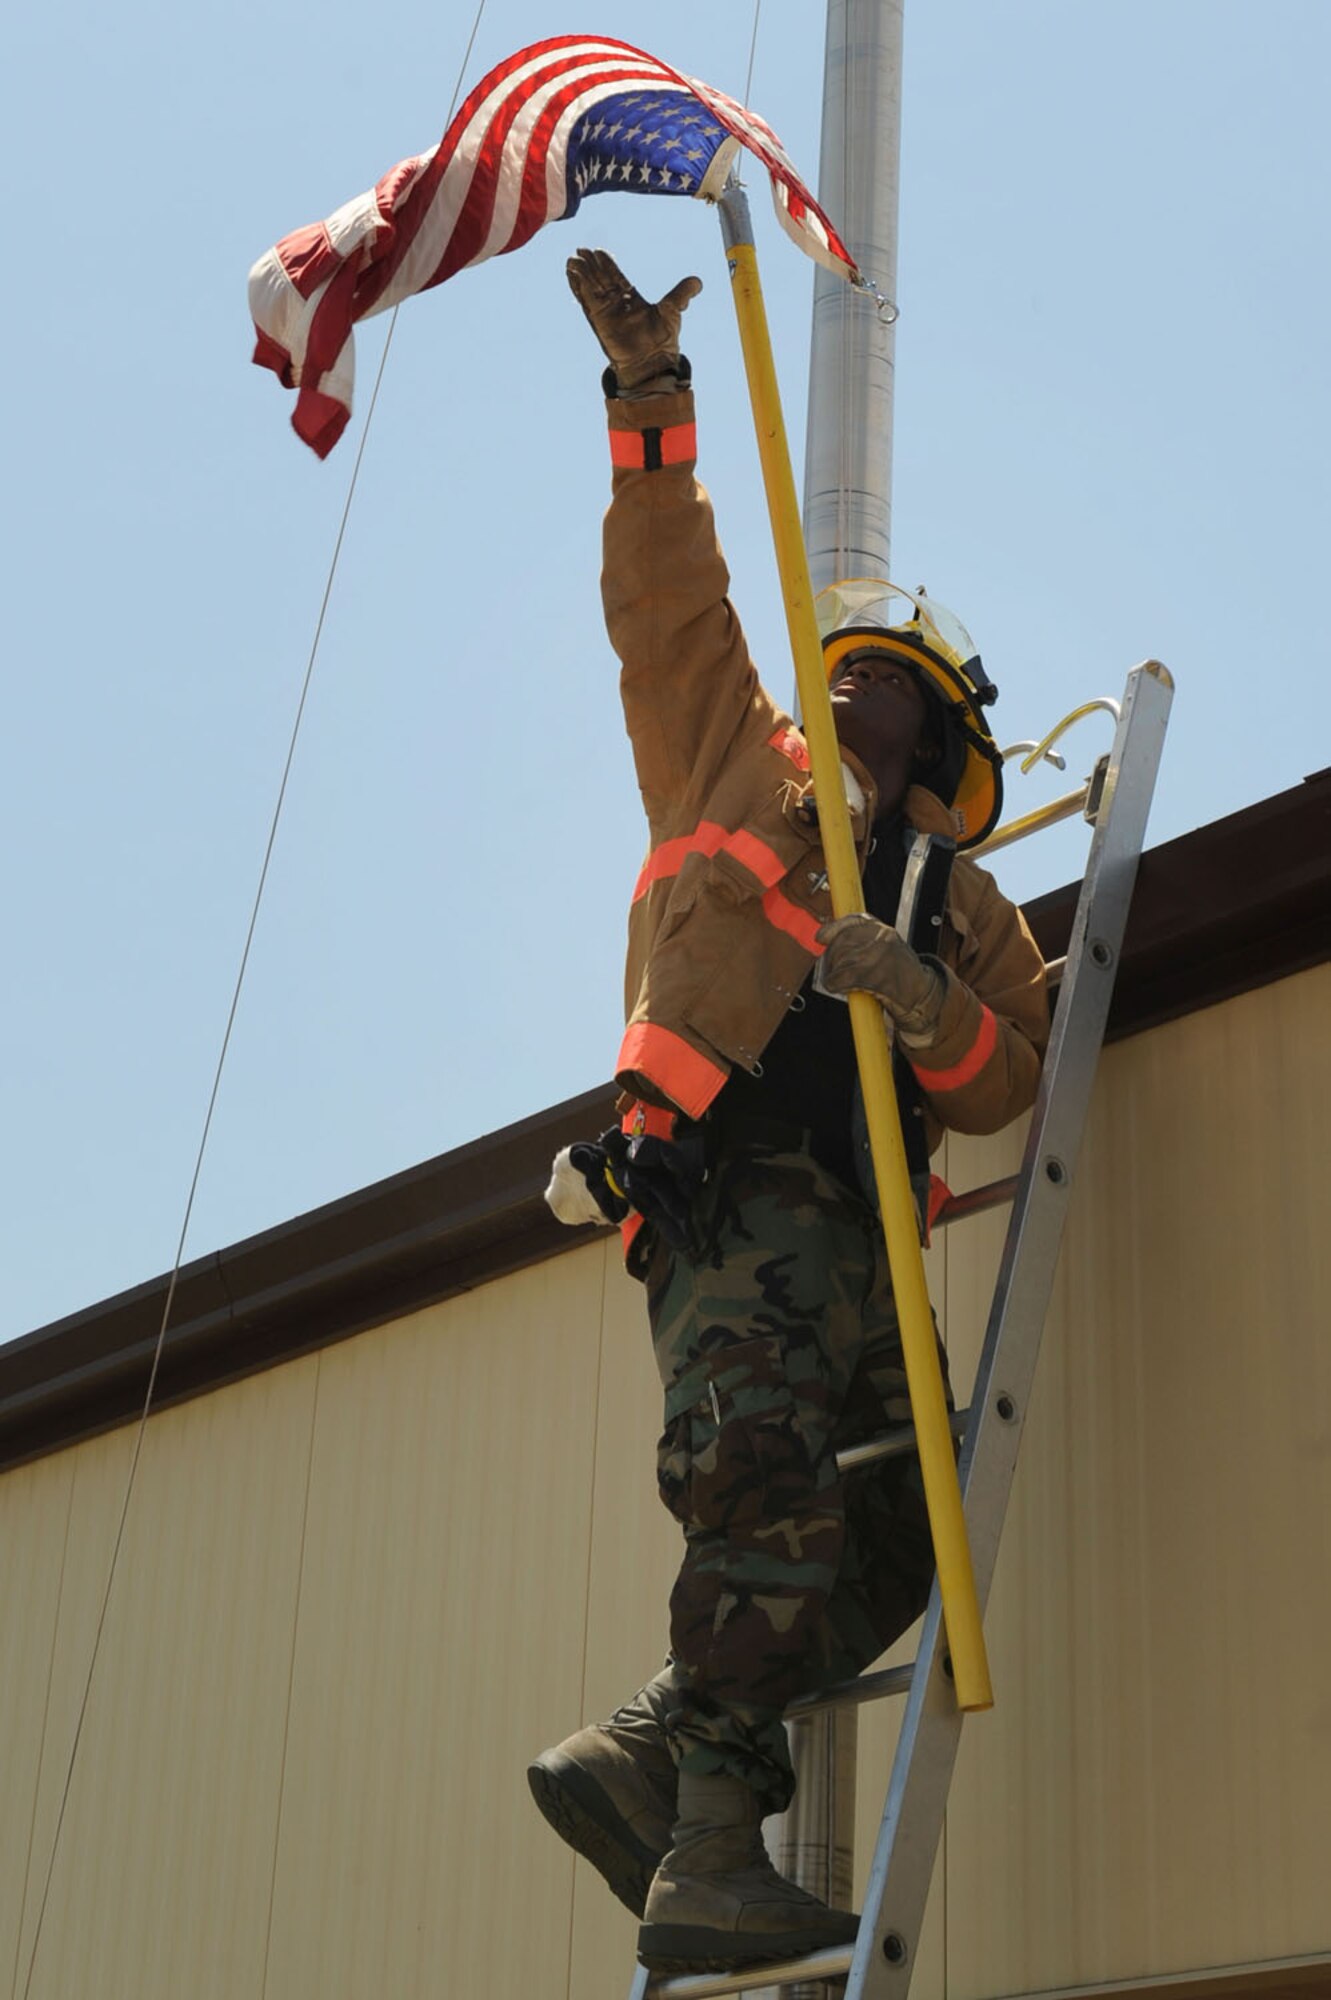 WHITEMAN AIR FORCE BASE, Mo. - Airman 1st Class Walter Daniels, 509th Civil Engineer Squadron Fire Fighter, assists base operations in lowering the flag after it had gotten stuck, July 24. (U.S. Air Force photo/Senior Airman Jason Huddleston)